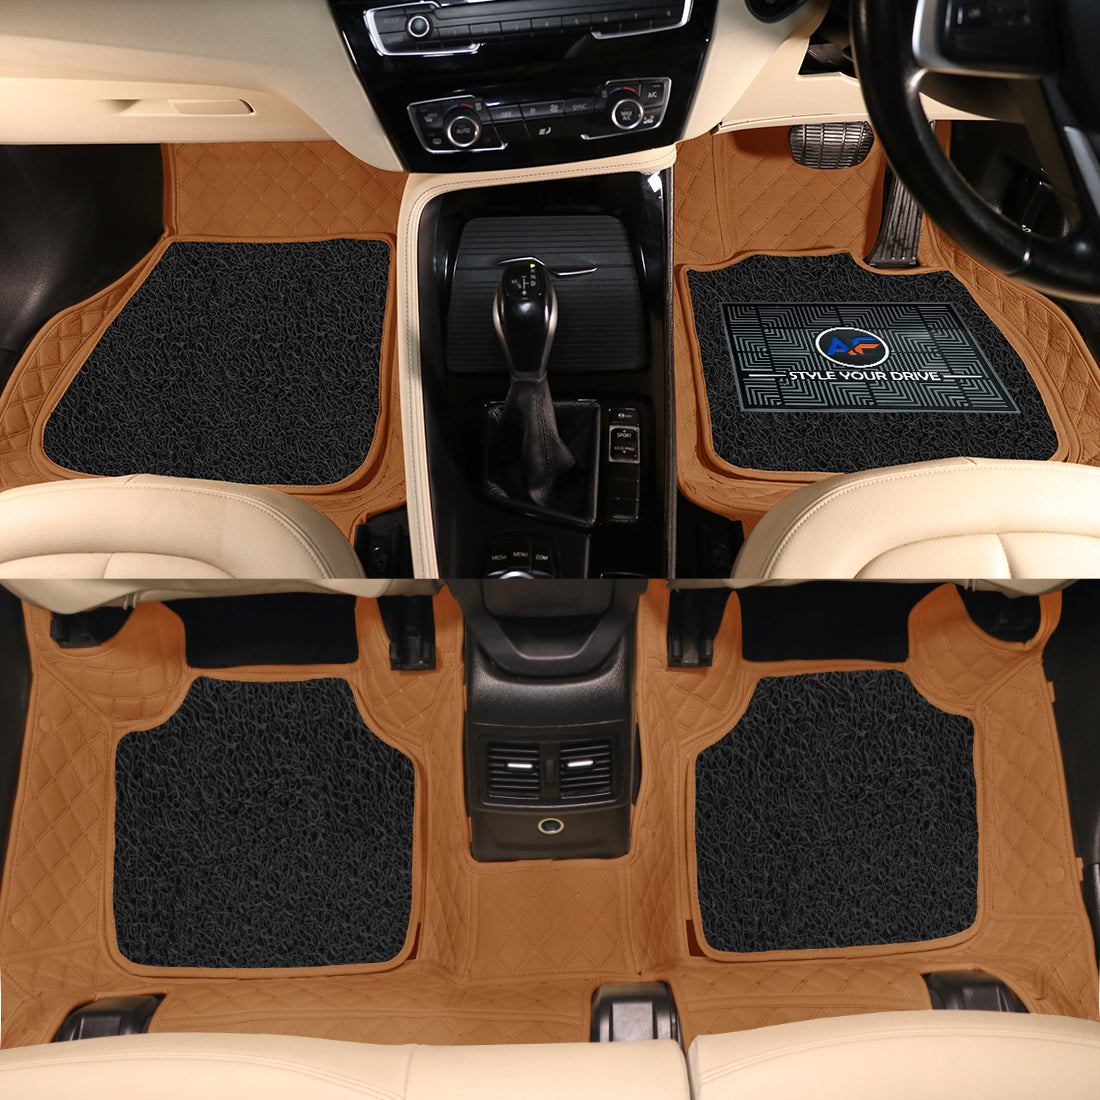 Audi A8 2013 7D Luxury Car Mat, All Weather Proof, Anti-Skid, 100% Waterproof & Odorless with Unique Diamond Fish Design (24mm Luxury PU Leather, 2 Rows)